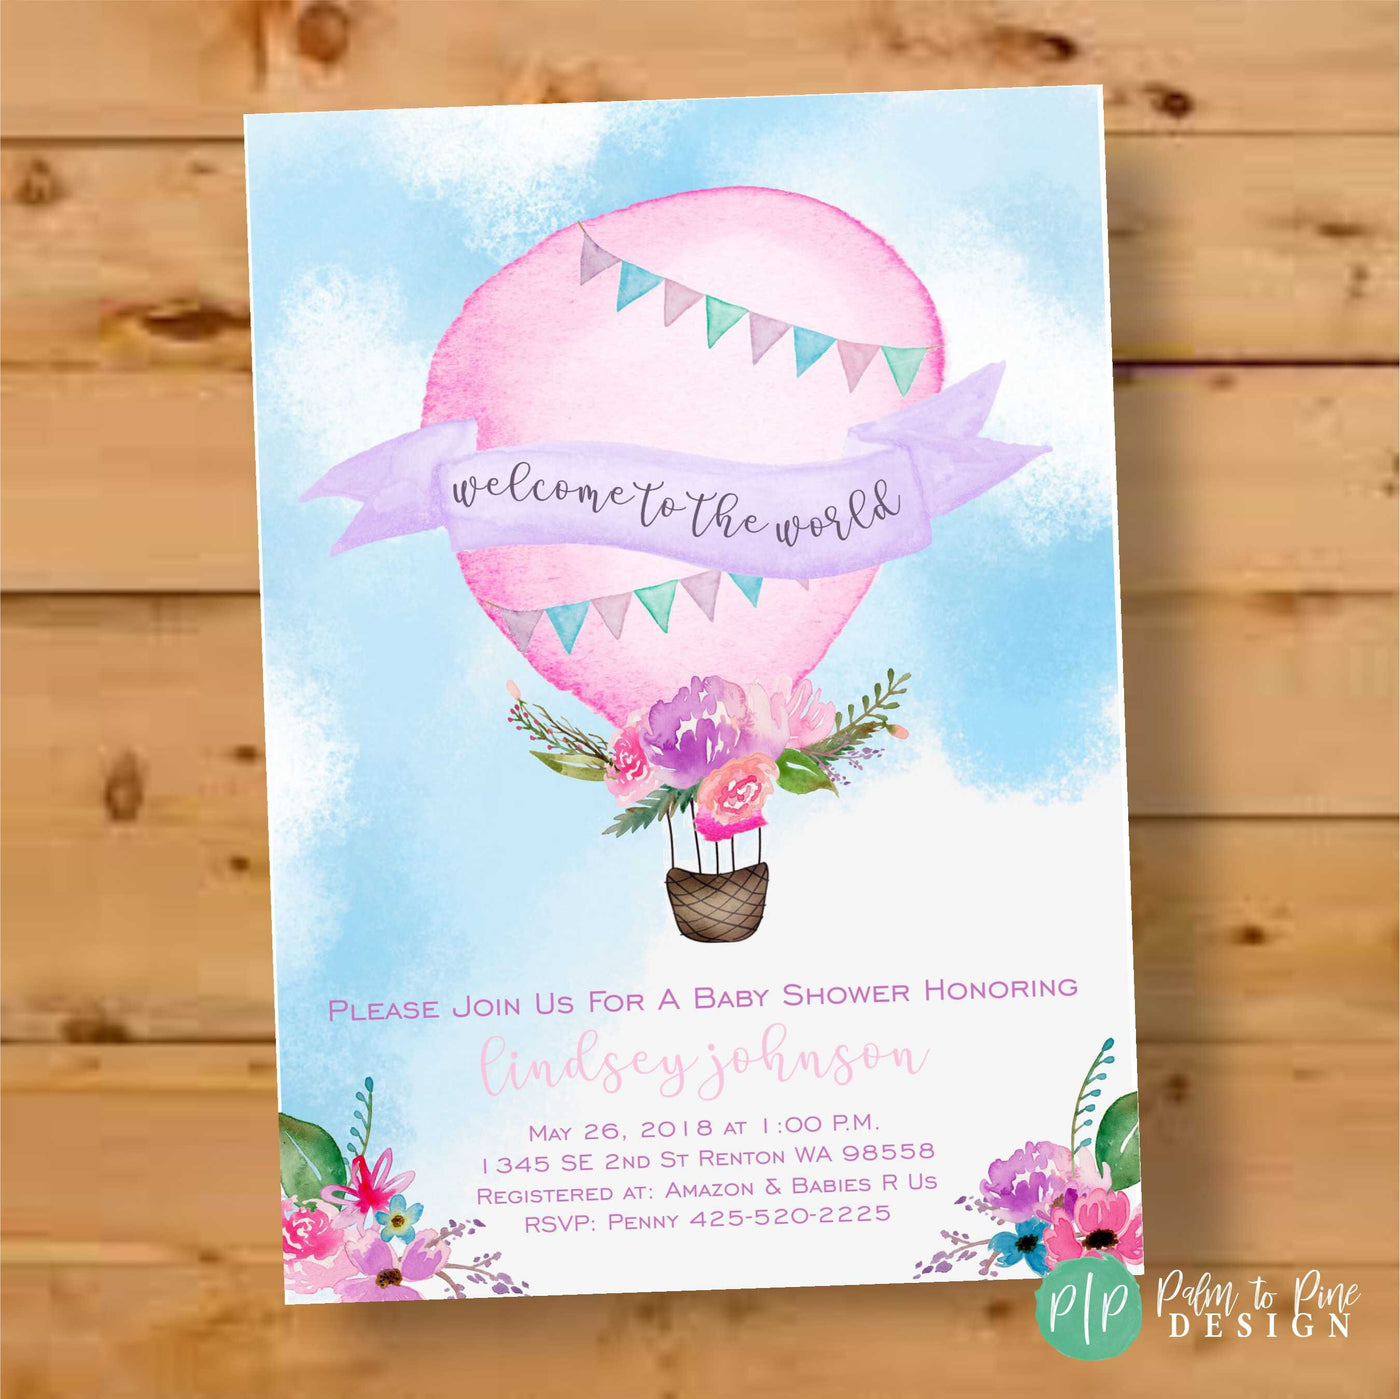 Hot Air Balloon Baby Shower Invitation, Hot Air Balloon Baby Shower, Hot Air Balloon Invitation, Pink Watercolor, Up Up and Away Baby Shower